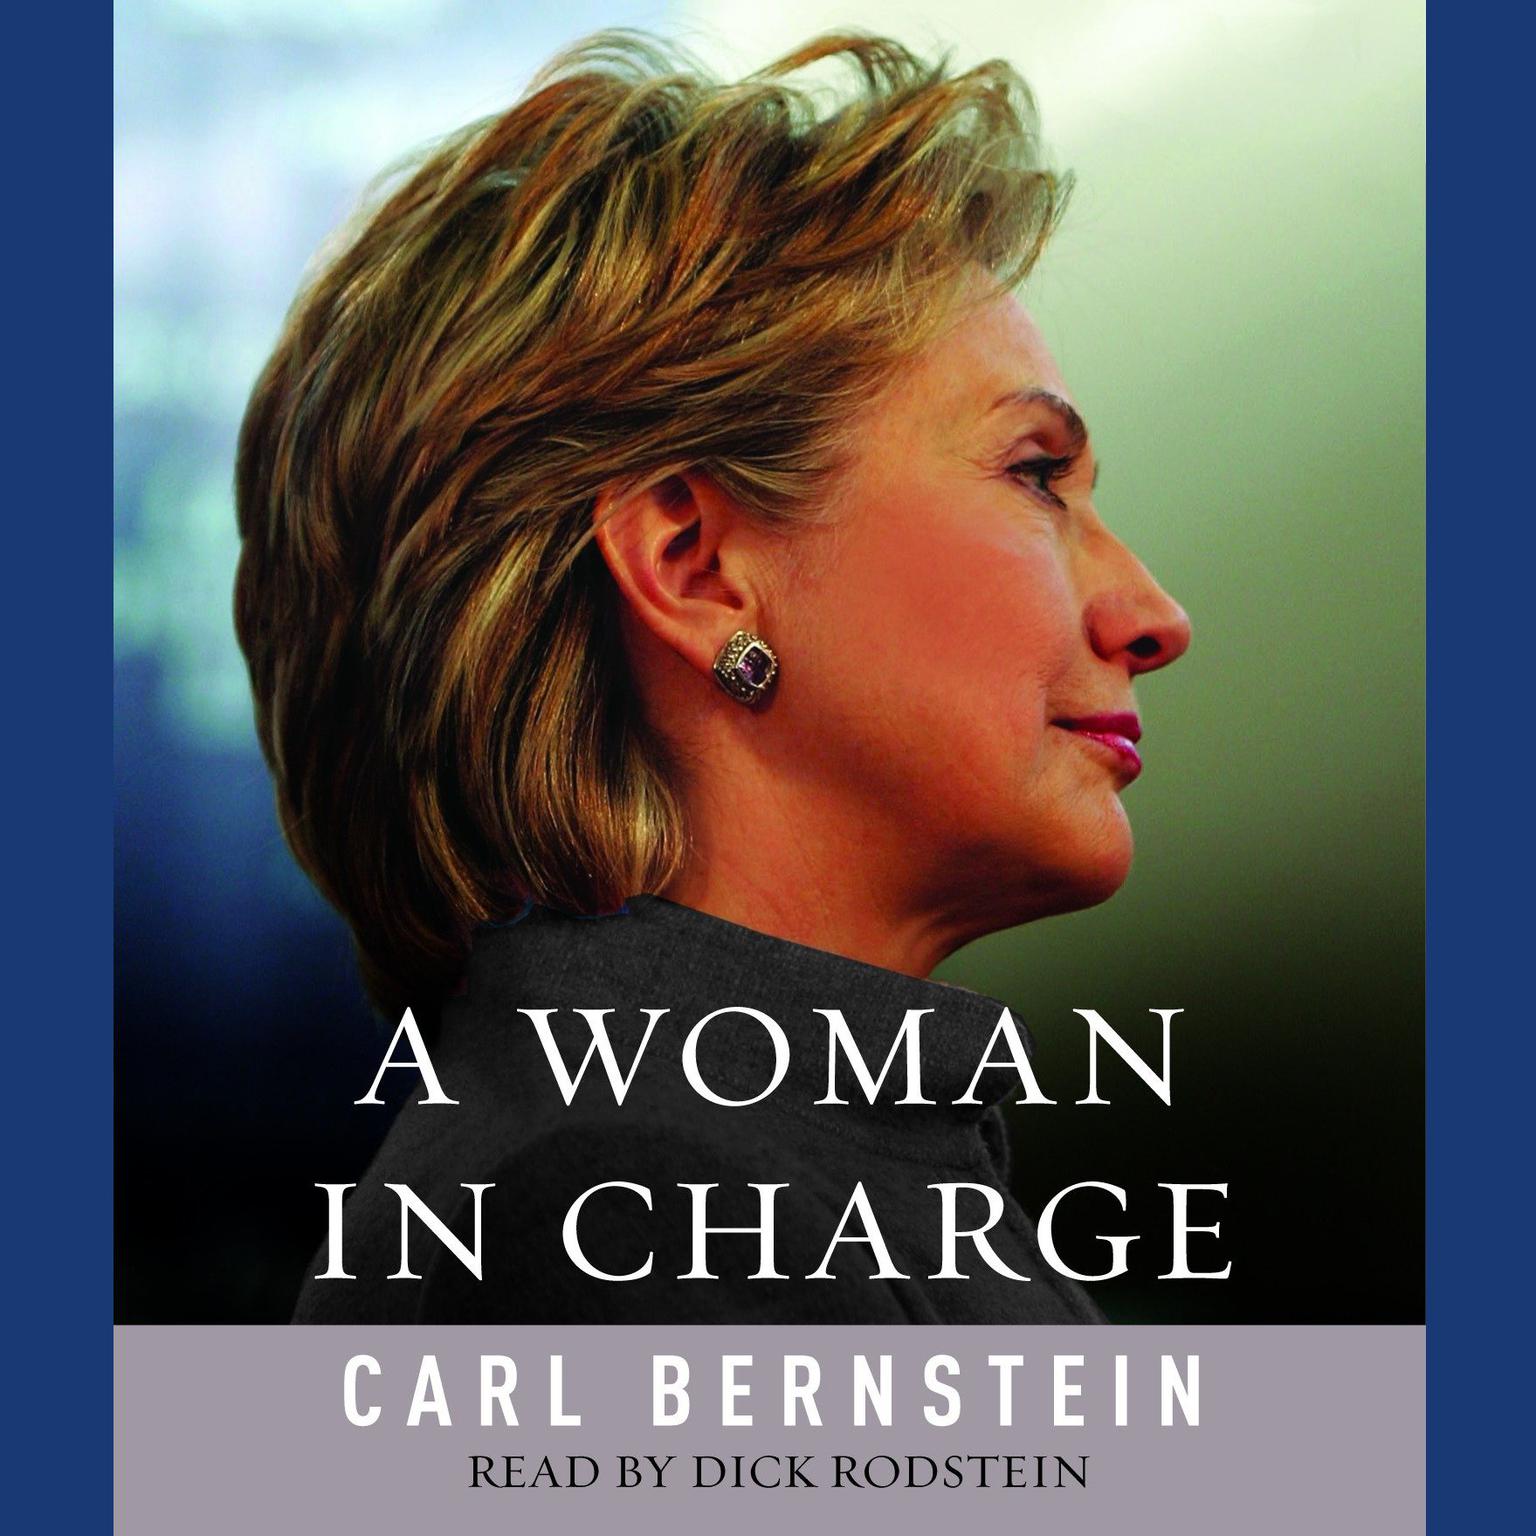 A Woman in Charge (Abridged): The Life of Hillary Rodham Clinton Audiobook, by Carl Bernstein